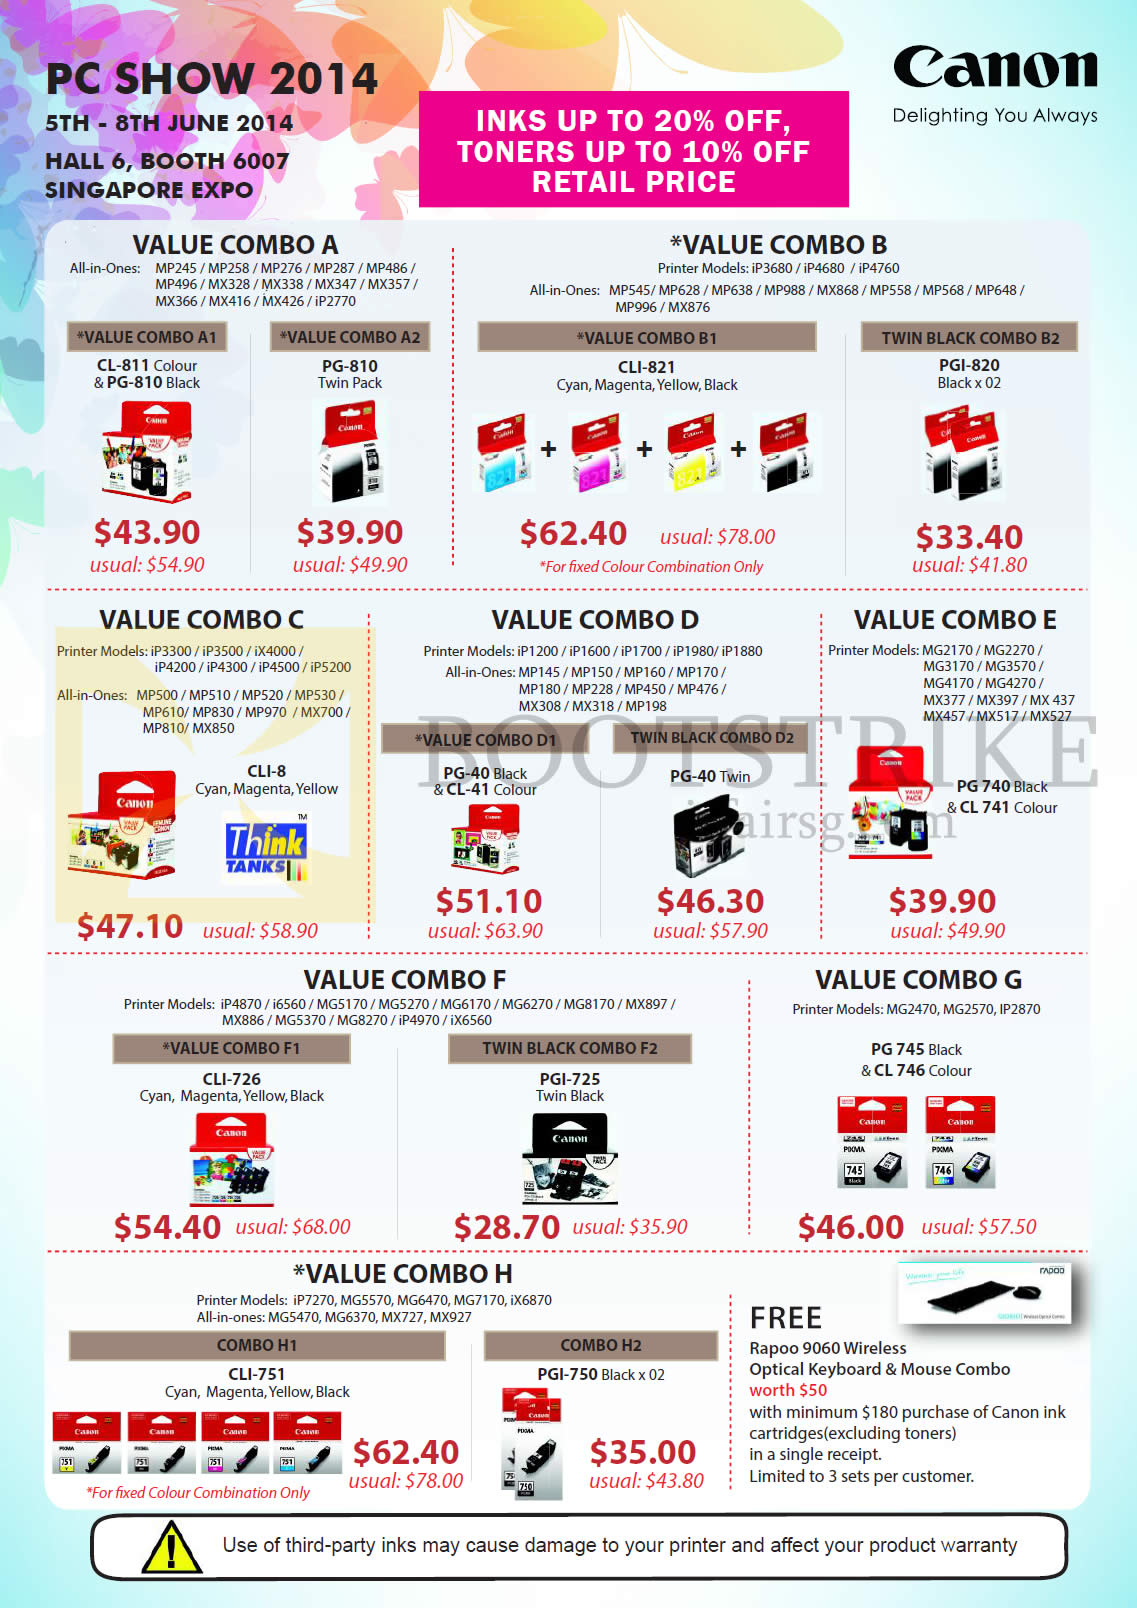 PC SHOW 2014 price list image brochure of Canon Ink Cartridge Value Combos A, B, C, D, E, F, G, H